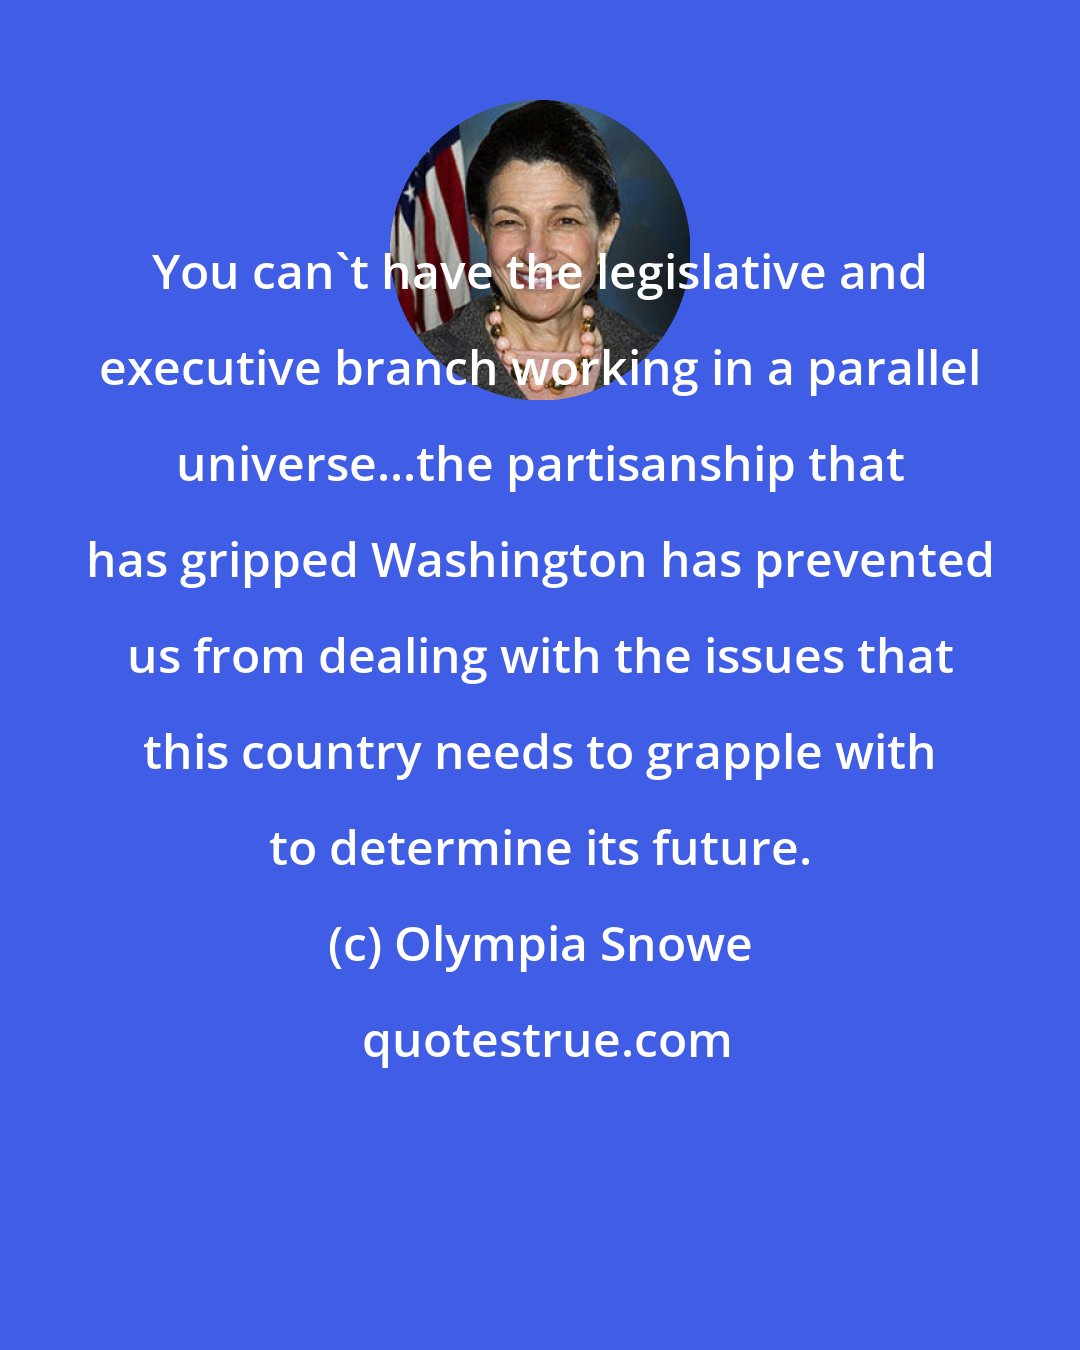 Olympia Snowe: You can't have the legislative and executive branch working in a parallel universe...the partisanship that has gripped Washington has prevented us from dealing with the issues that this country needs to grapple with to determine its future.